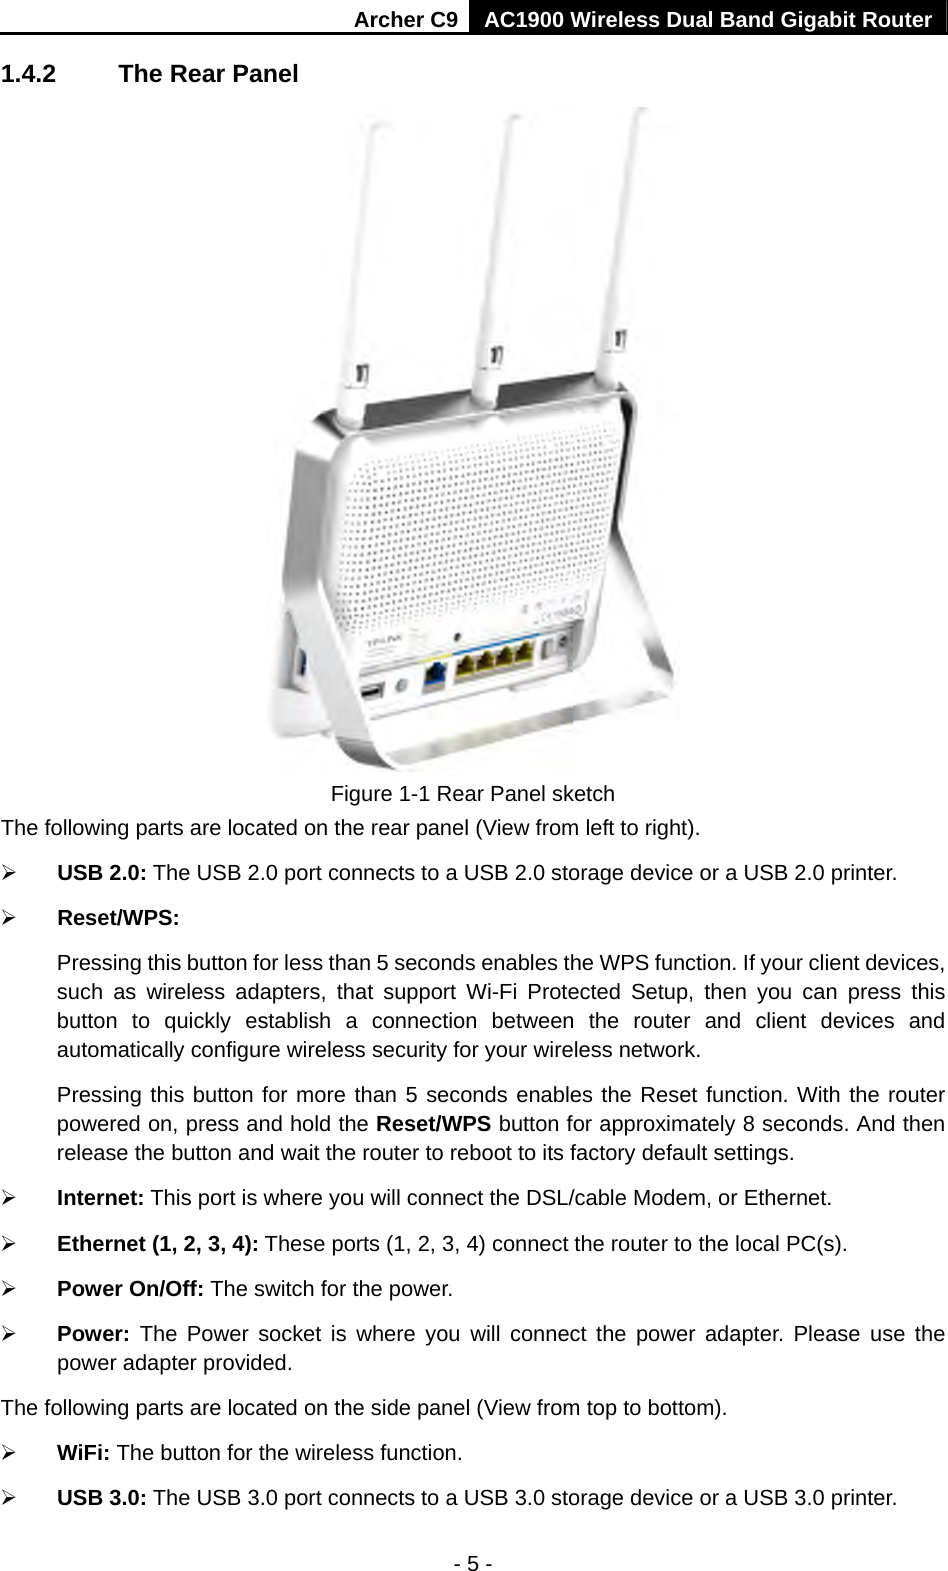 Archer C9 AC1900 Wireless Dual Band Gigabit Router - 5 - 1.4.2  The Rear Panel  Figure 1-1 Rear Panel sketch The following parts are located on the rear panel (View from left to right).  USB 2.0: The USB 2.0 port connects to a USB 2.0 storage device or a USB 2.0 printer.  Reset/WPS:   Pressing this button for less than 5 seconds enables the WPS function. If your client devices, such as wireless adapters, that support Wi-Fi Protected Setup, then you can press this button to quickly establish a connection between the router and client devices and automatically configure wireless security for your wireless network.   Pressing this button for more than 5 seconds enables the Reset function. With the router powered on, press and hold the Reset/WPS button for approximately 8 seconds. And then release the button and wait the router to reboot to its factory default settings.  Internet: This port is where you will connect the DSL/cable Modem, or Ethernet.  Ethernet (1, 2, 3, 4): These ports (1, 2, 3, 4) connect the router to the local PC(s).  Power On/Off: The switch for the power.  Power: The Power socket is where you will connect the power adapter. Please use the power adapter provided. The following parts are located on the side panel (View from top to bottom).  WiFi: The button for the wireless function.  USB 3.0: The USB 3.0 port connects to a USB 3.0 storage device or a USB 3.0 printer. 